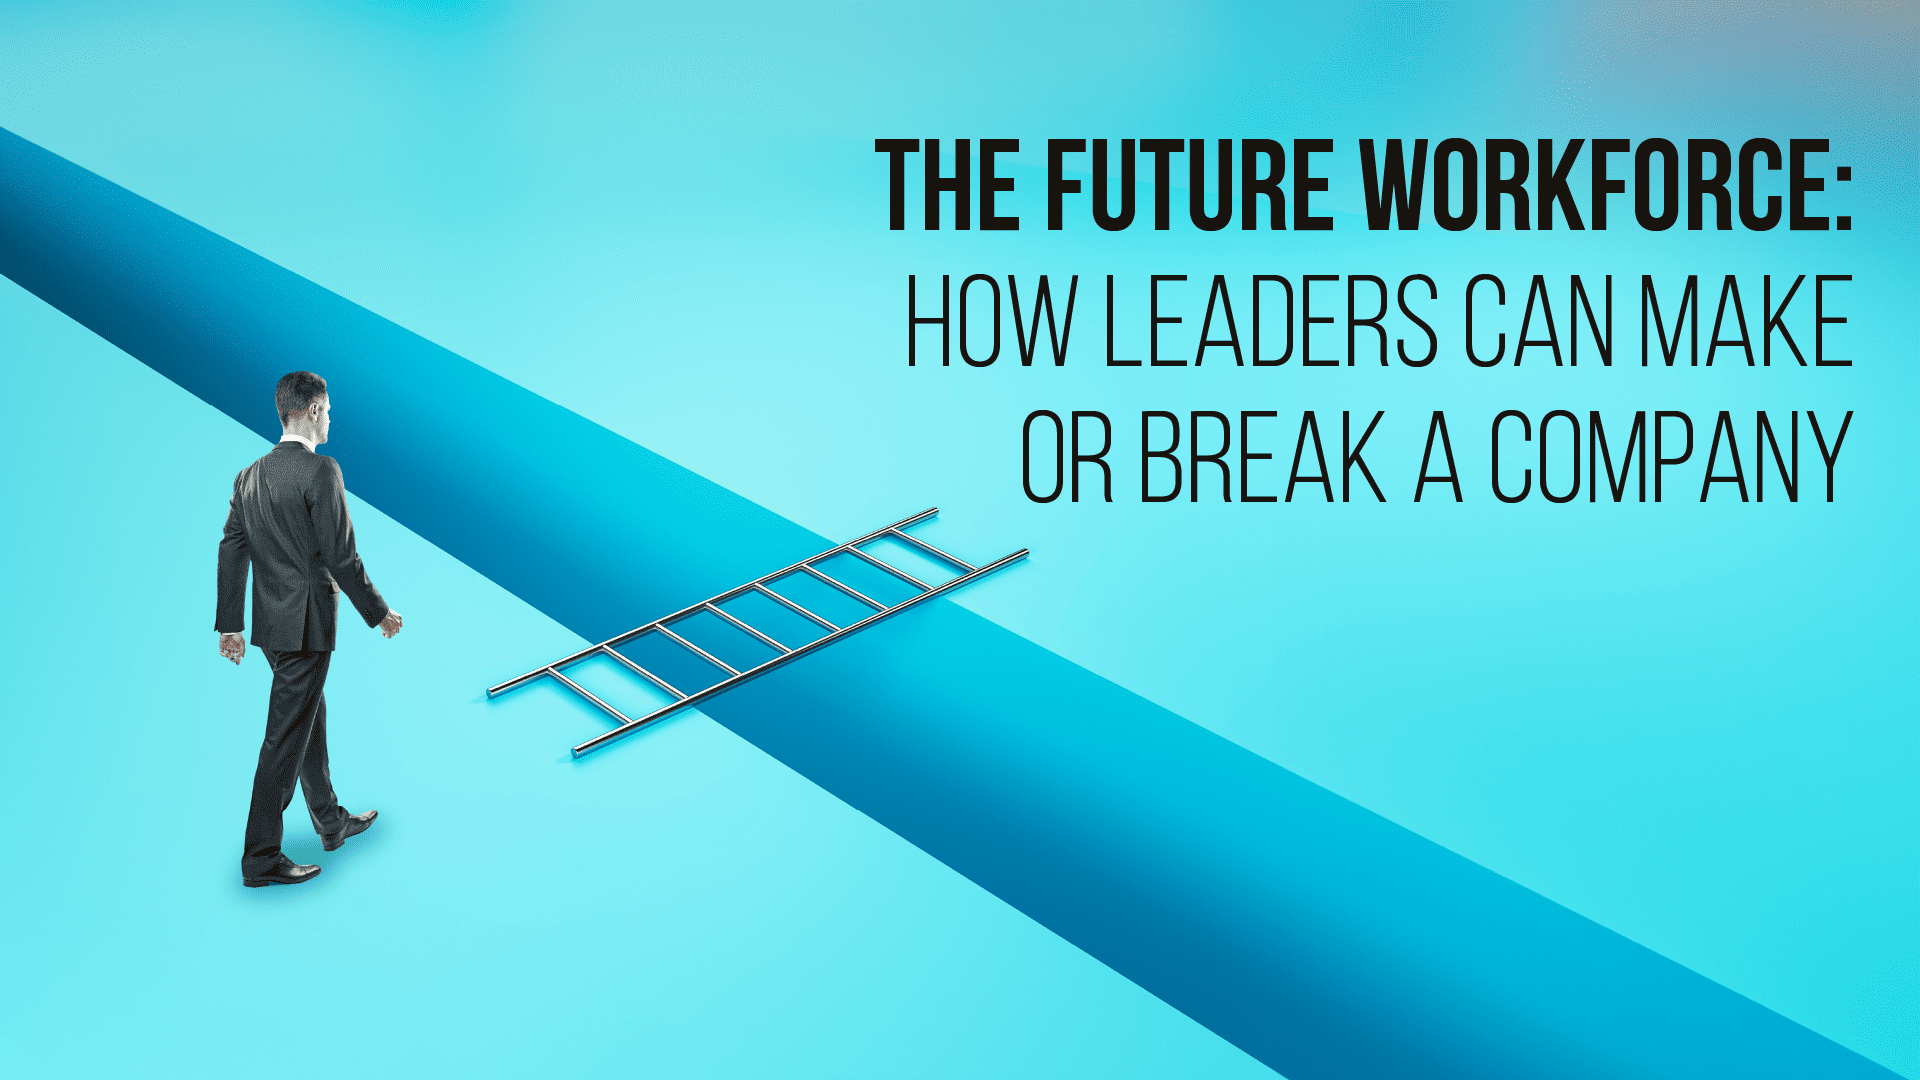 The Future Workforce: How Leaders Can Make or Break a Company